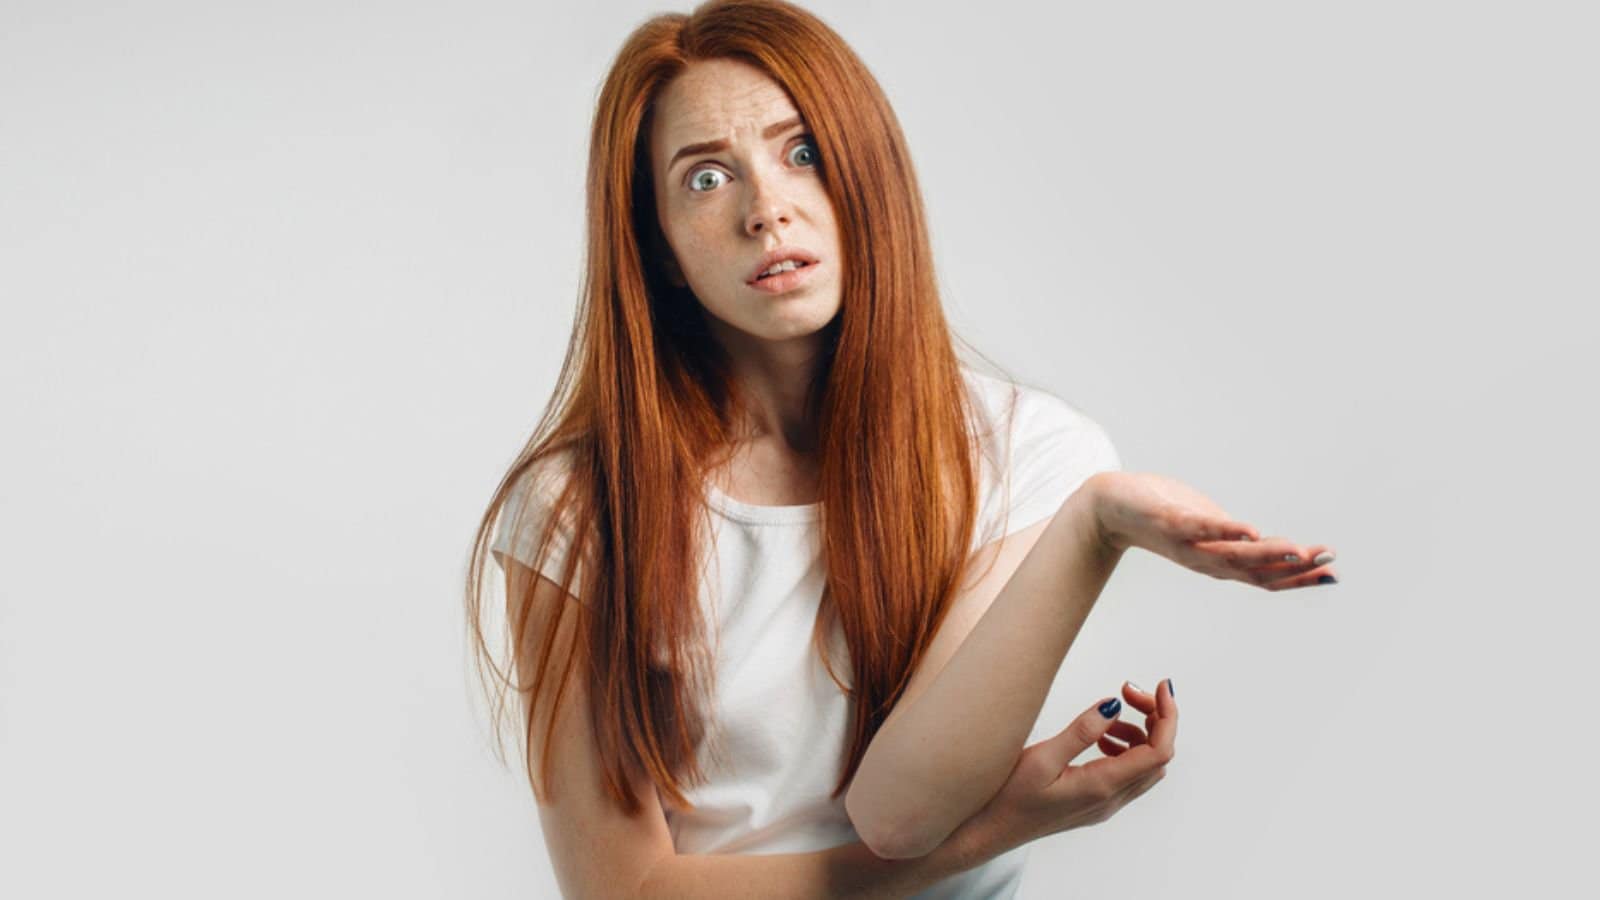 Puzzled and clueless young redhead woman with arms